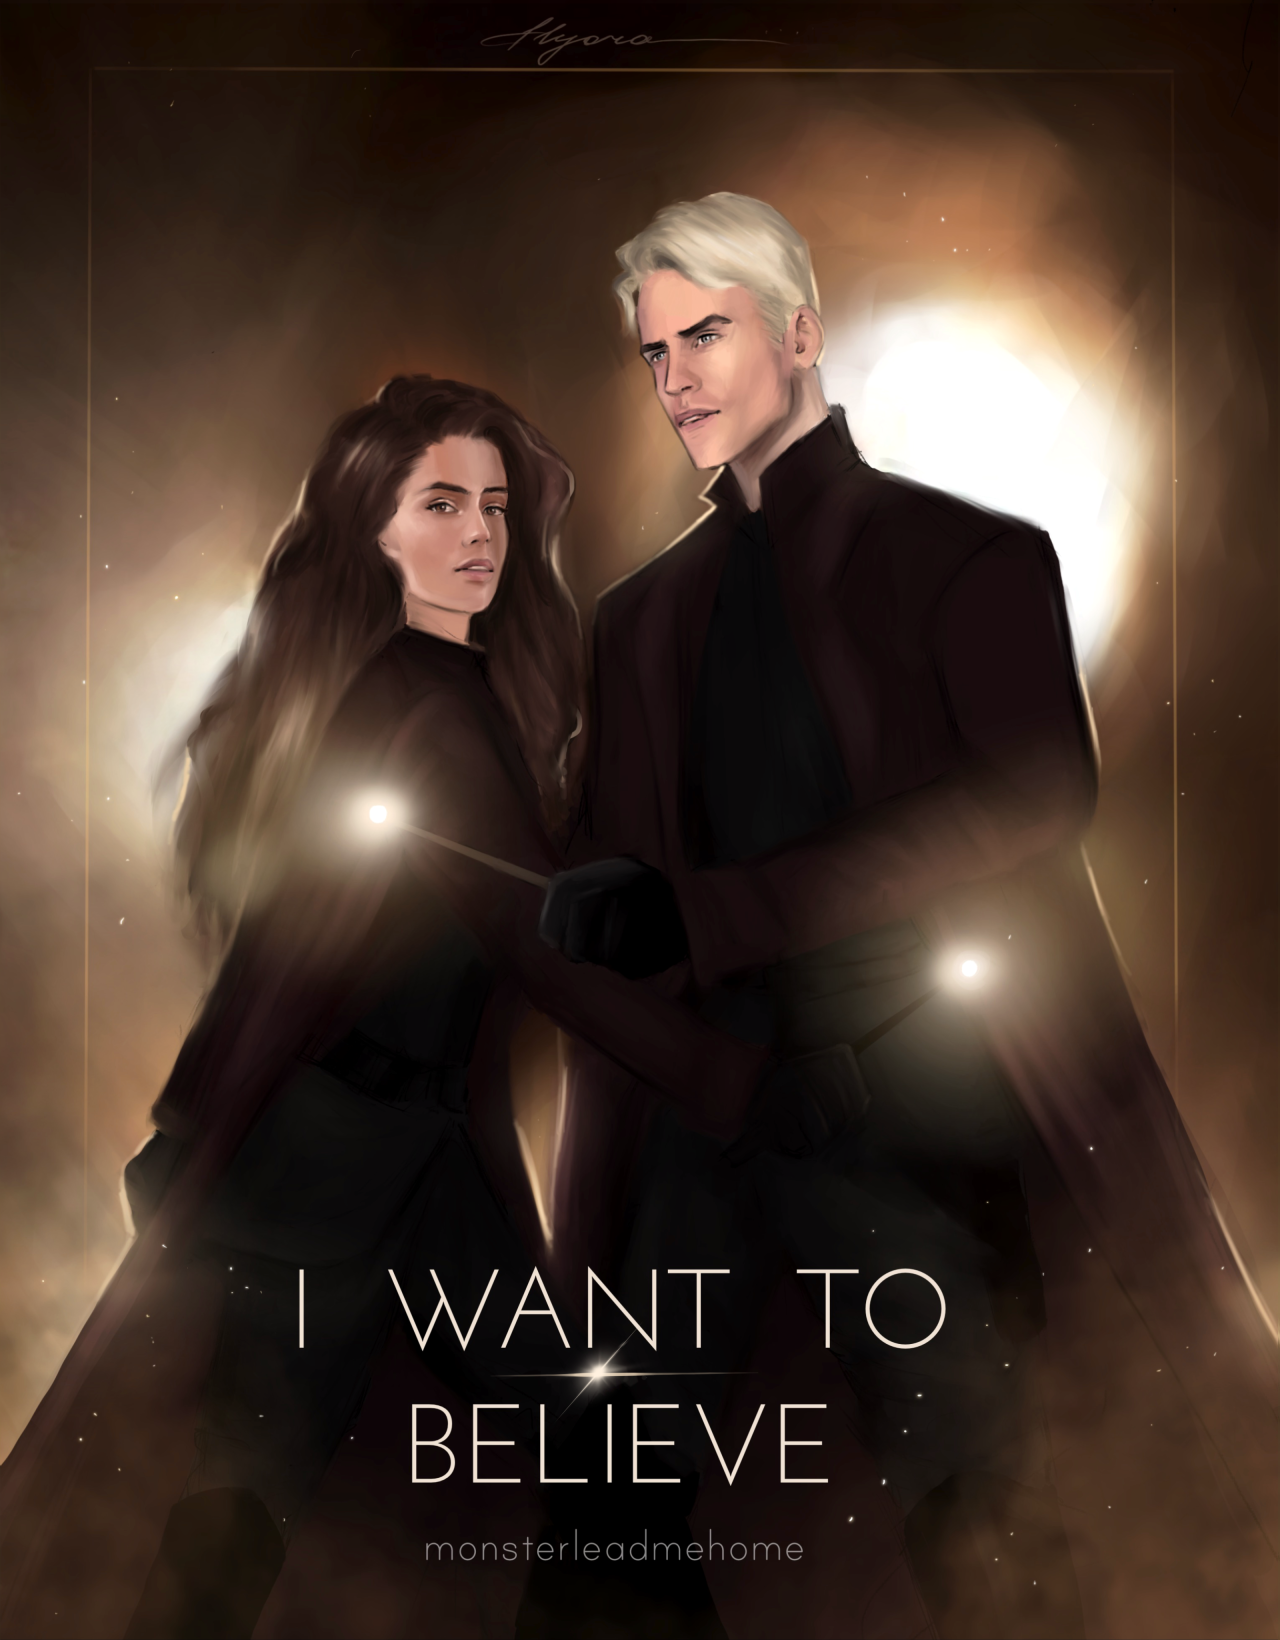 Deal With The Devil (Dramione) - Chapter Two: Checking In - Wattpad